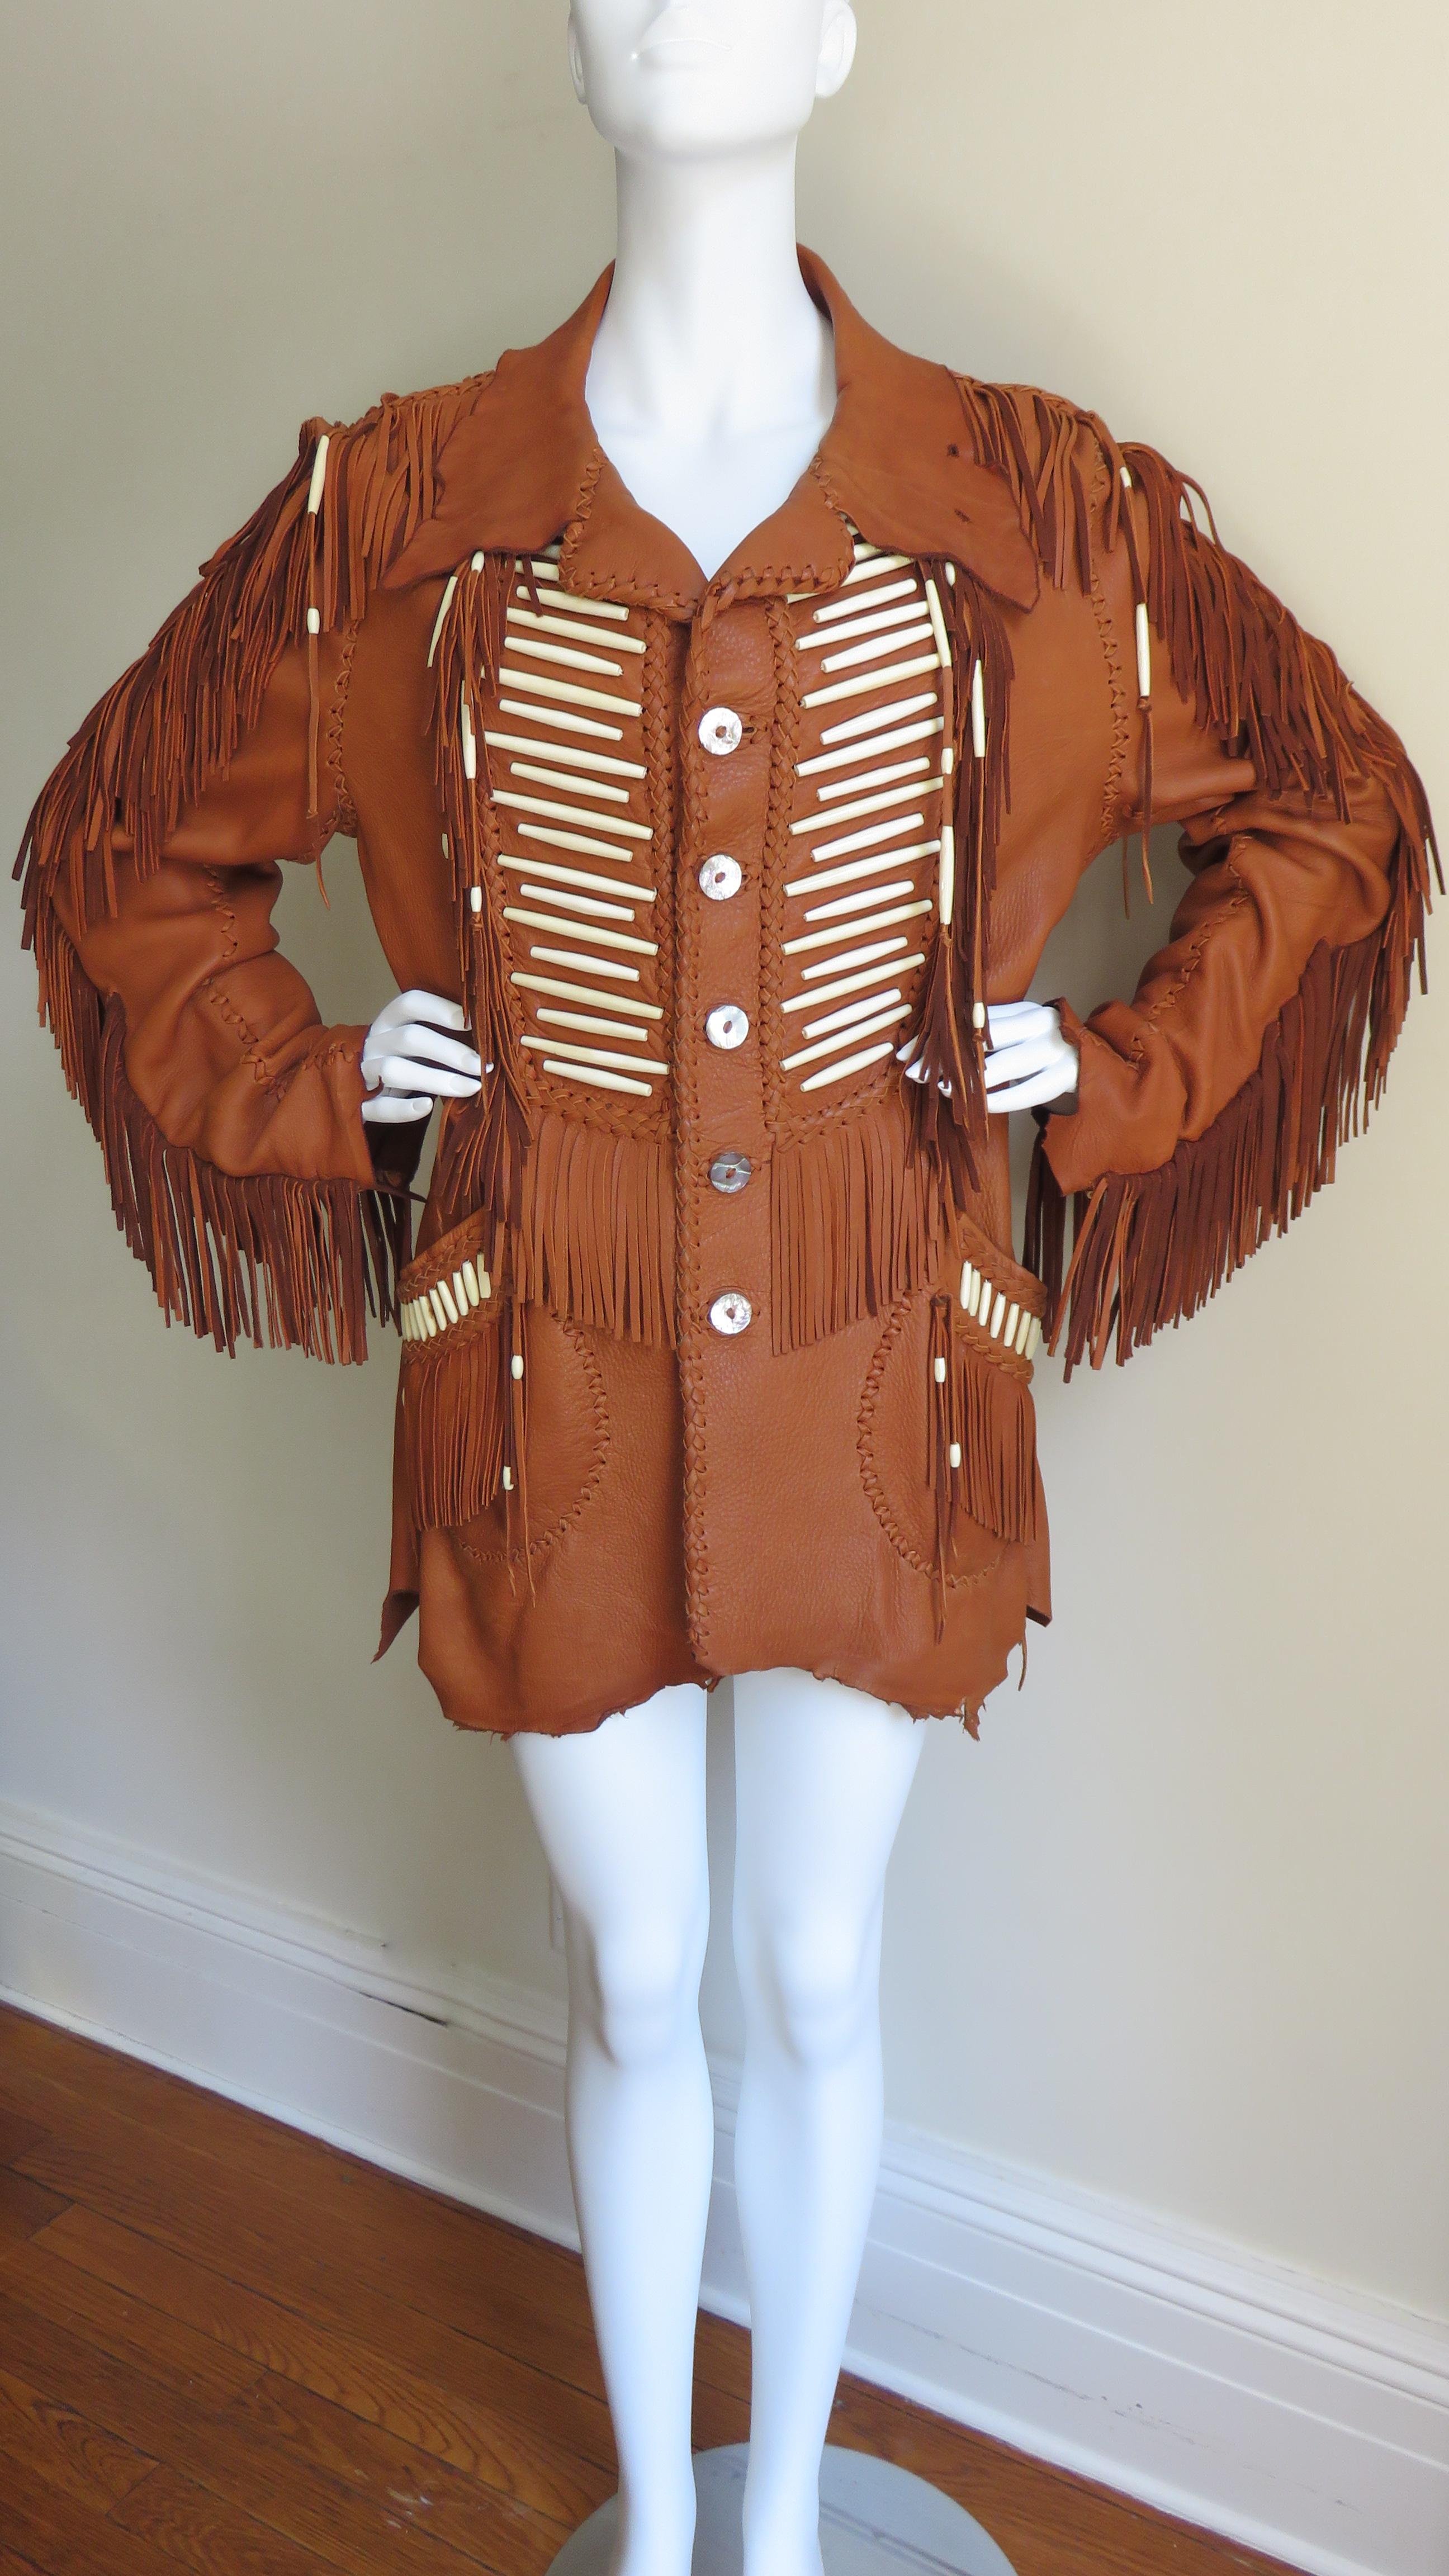 An absolutely amazing tan fringe leather jacket with carved bone detail.  The collar, cuffs and hem follow the natural lines of the hide, the other edges and seaming are highlighted with intricate hand braiding and knotting.  The outside of the